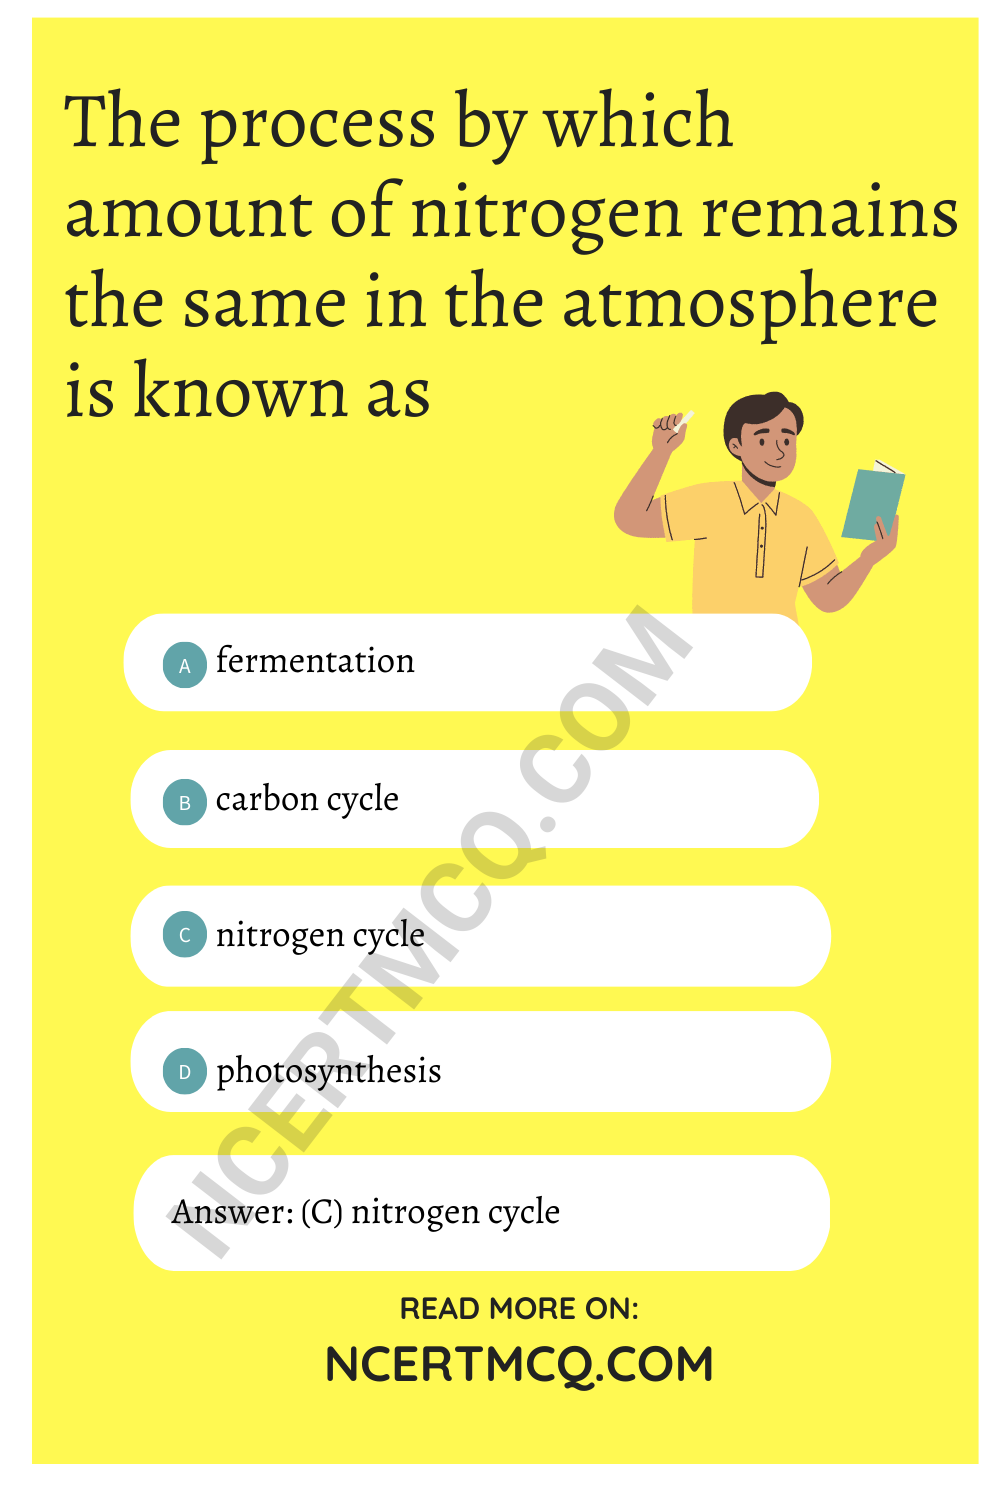 The process by which amount of nitrogen remains the same in the atmosphere is known as